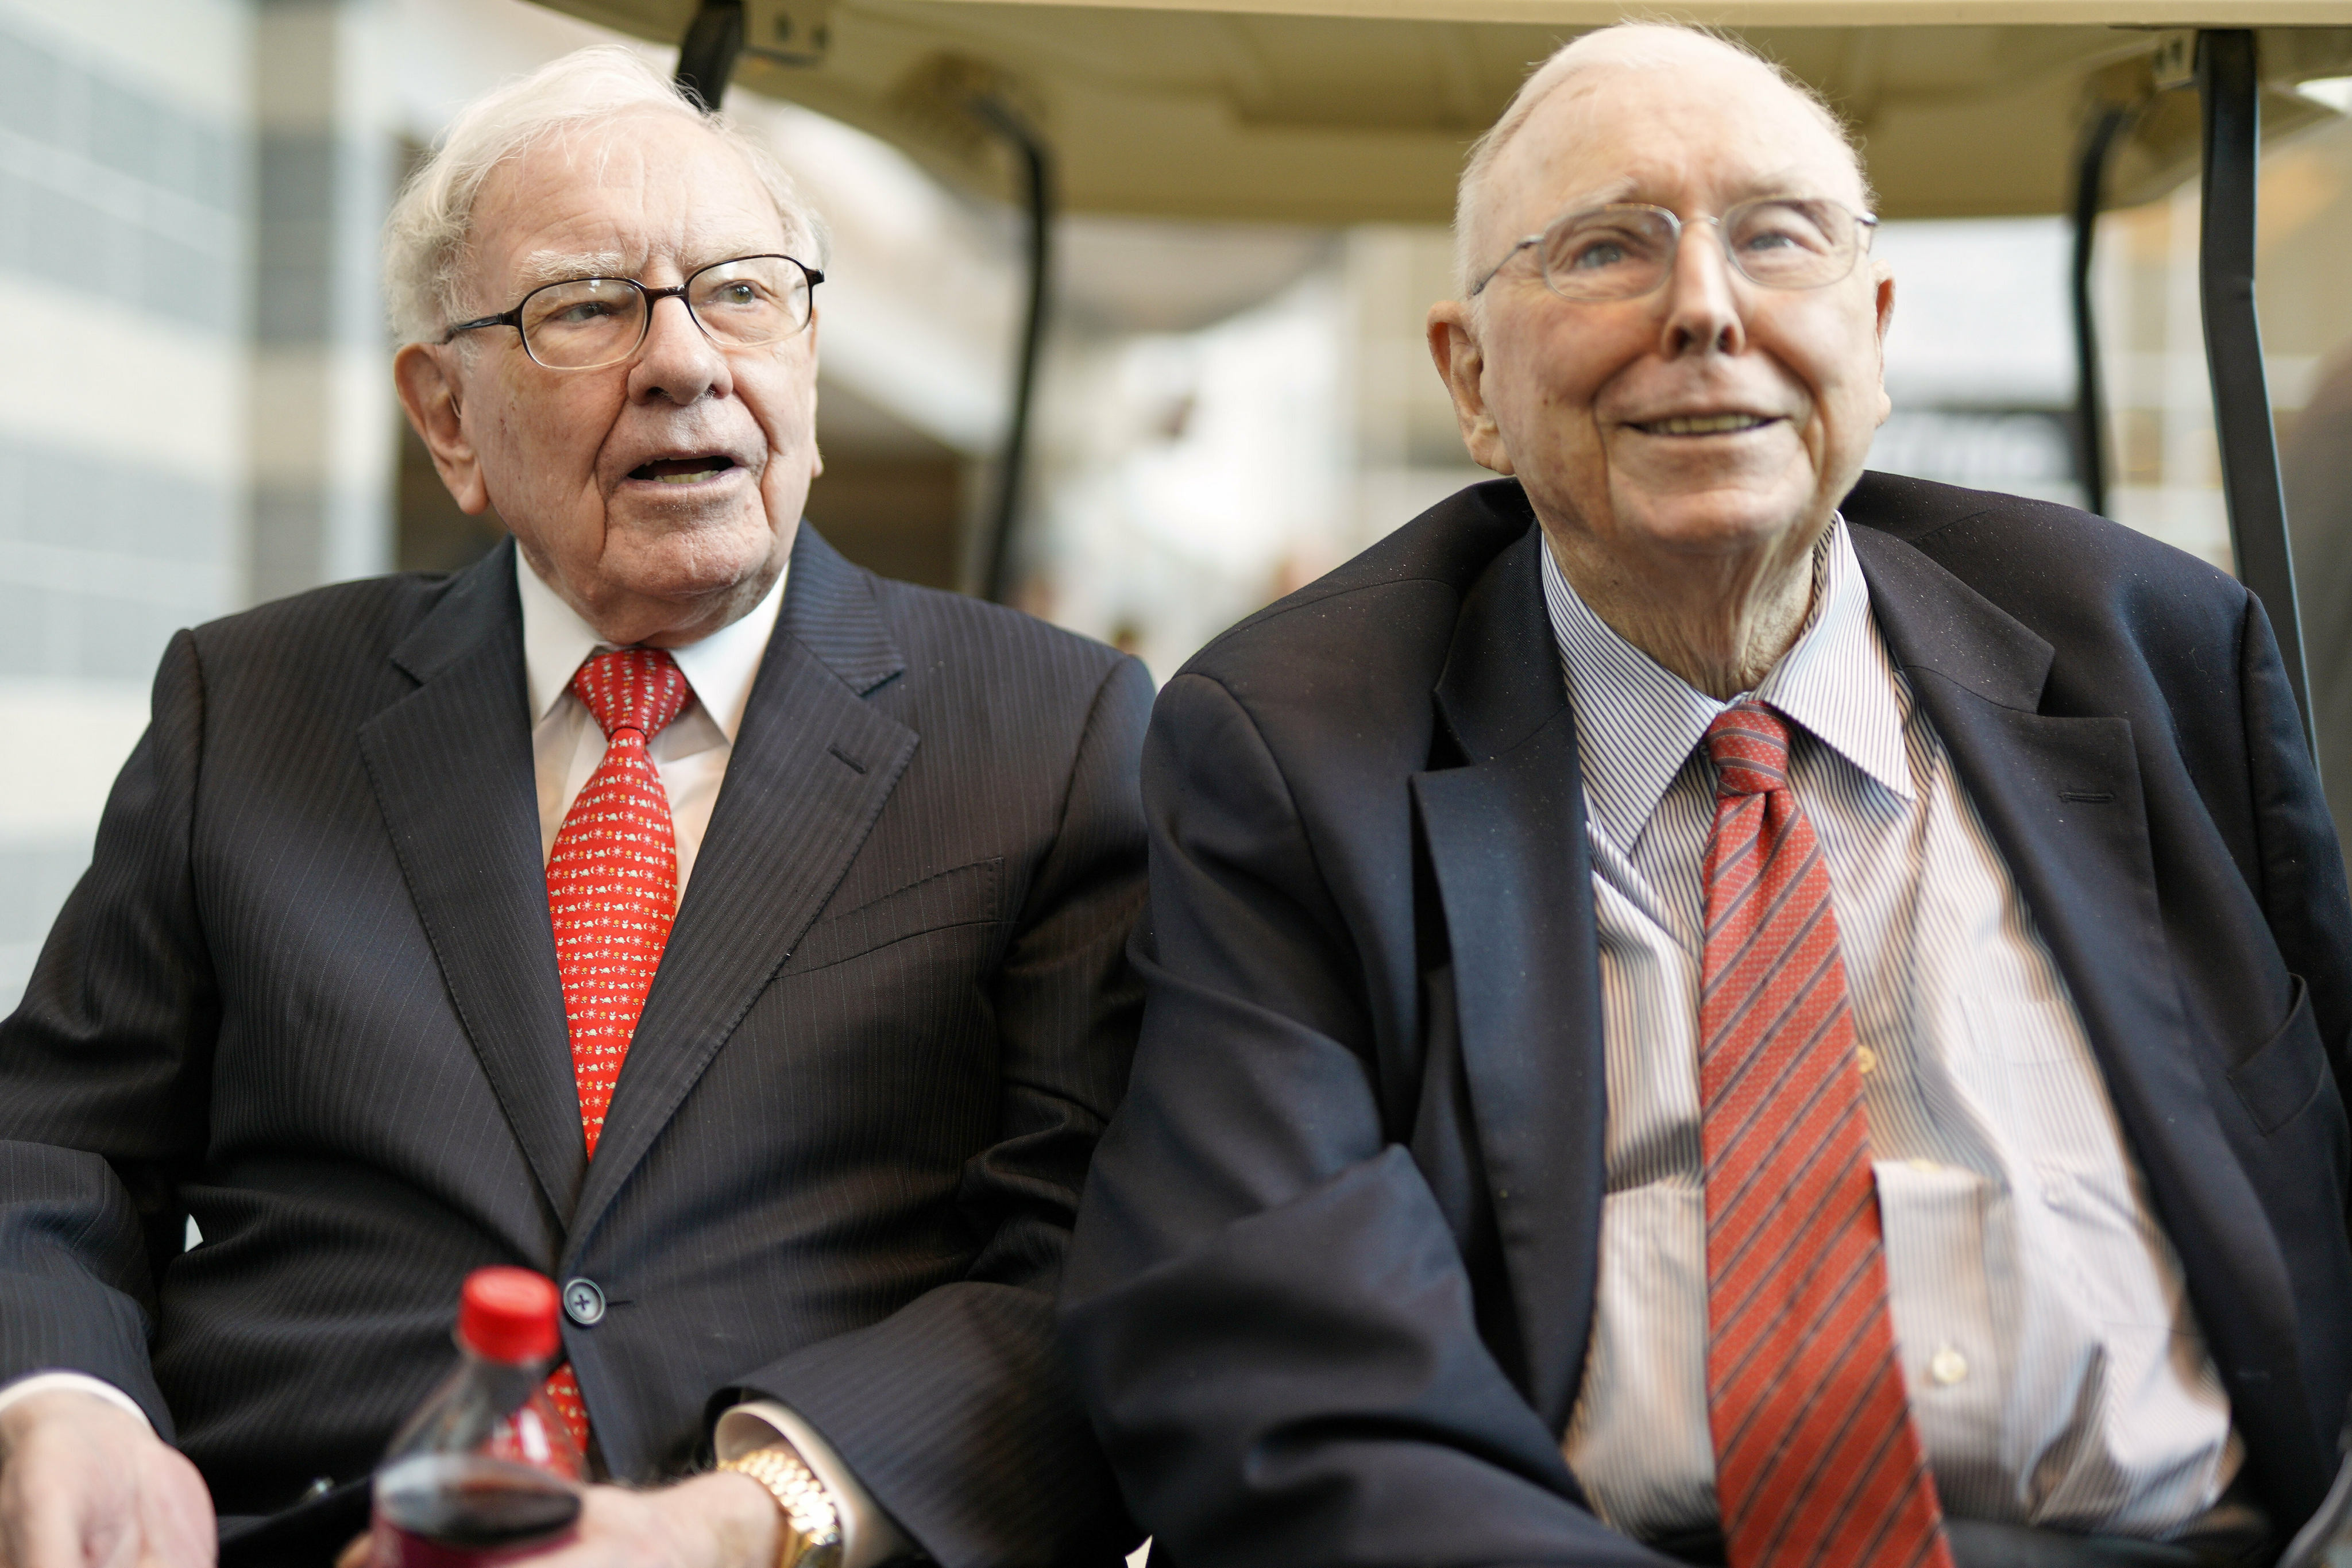 Berkshire Hathaway chairman Warren Buffett, left, and vice-chairman Charlie Munger chat with reporters on May 3, 2019. Munger, who helped Buffett build an investment powerhouse, has died at 99. Photo: AP